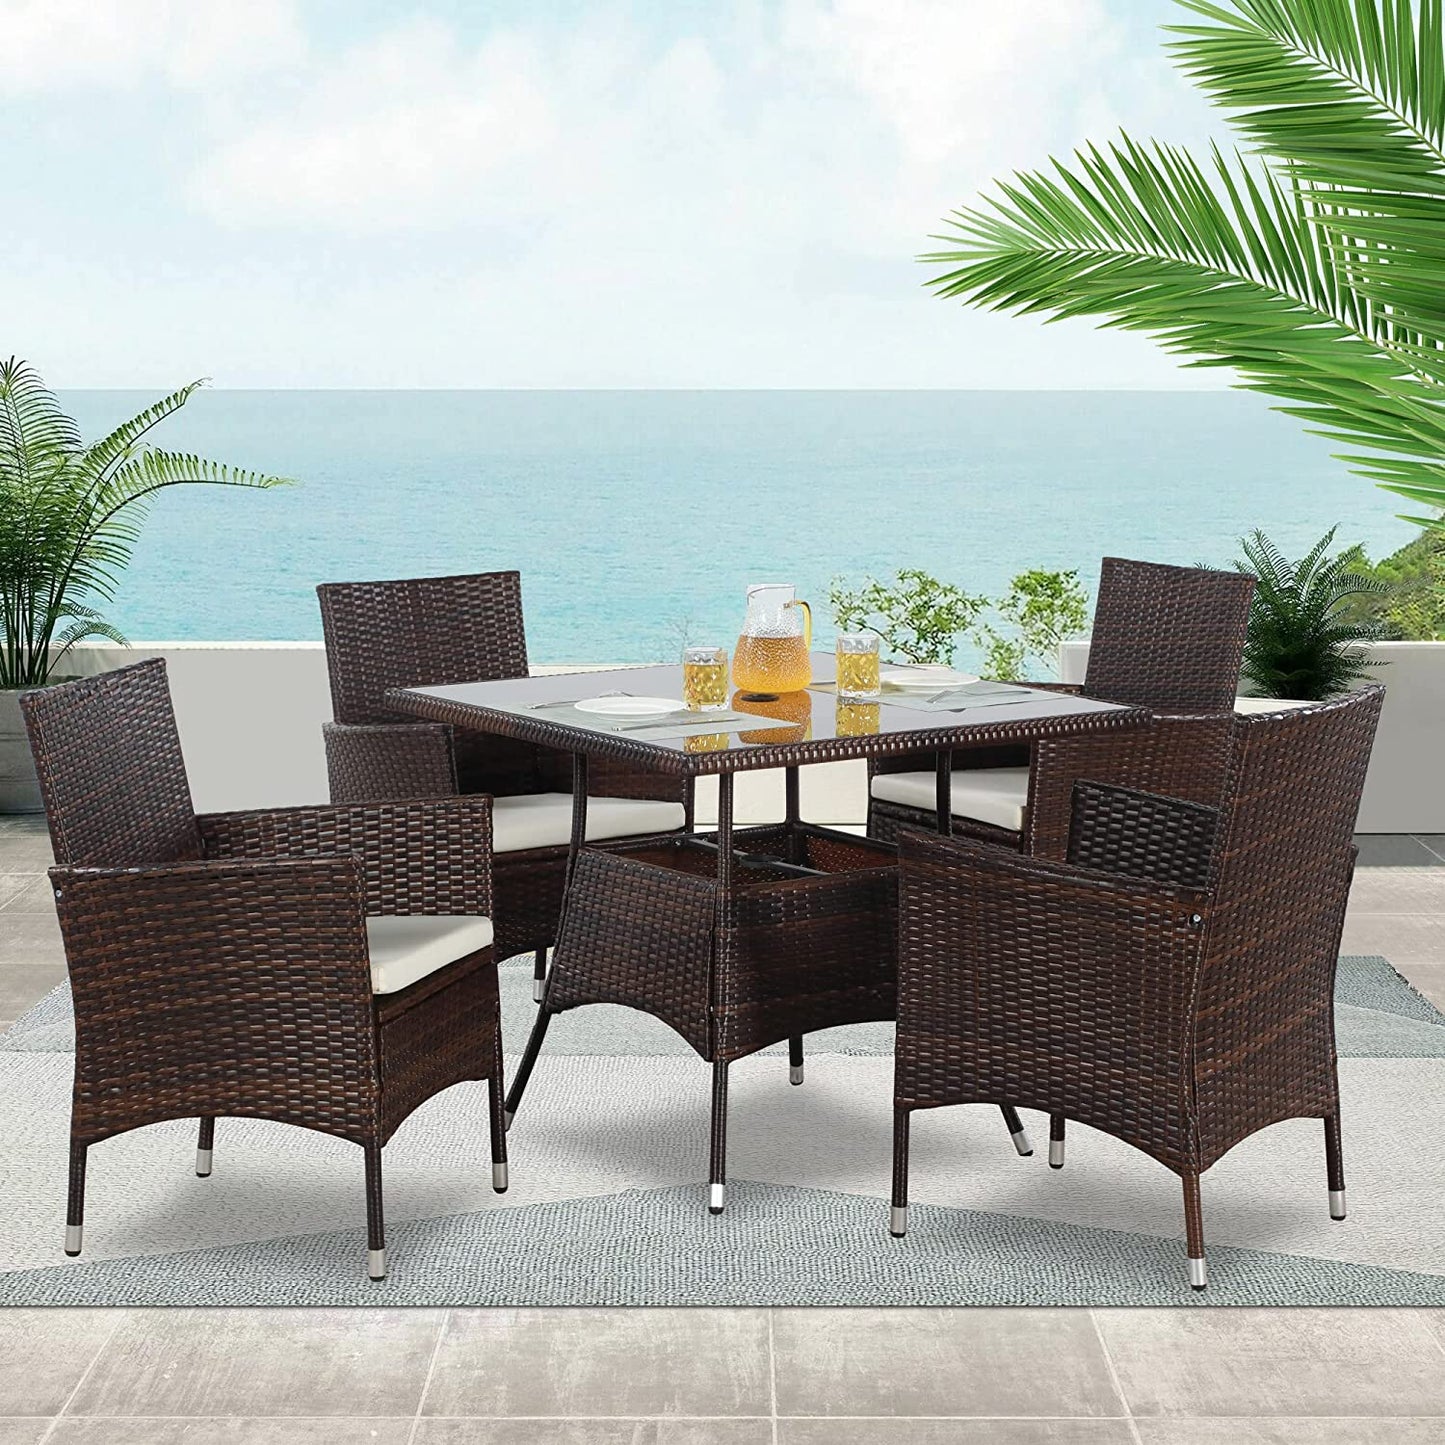 5-Piece Wicker Patio Dining Table and Chair Set